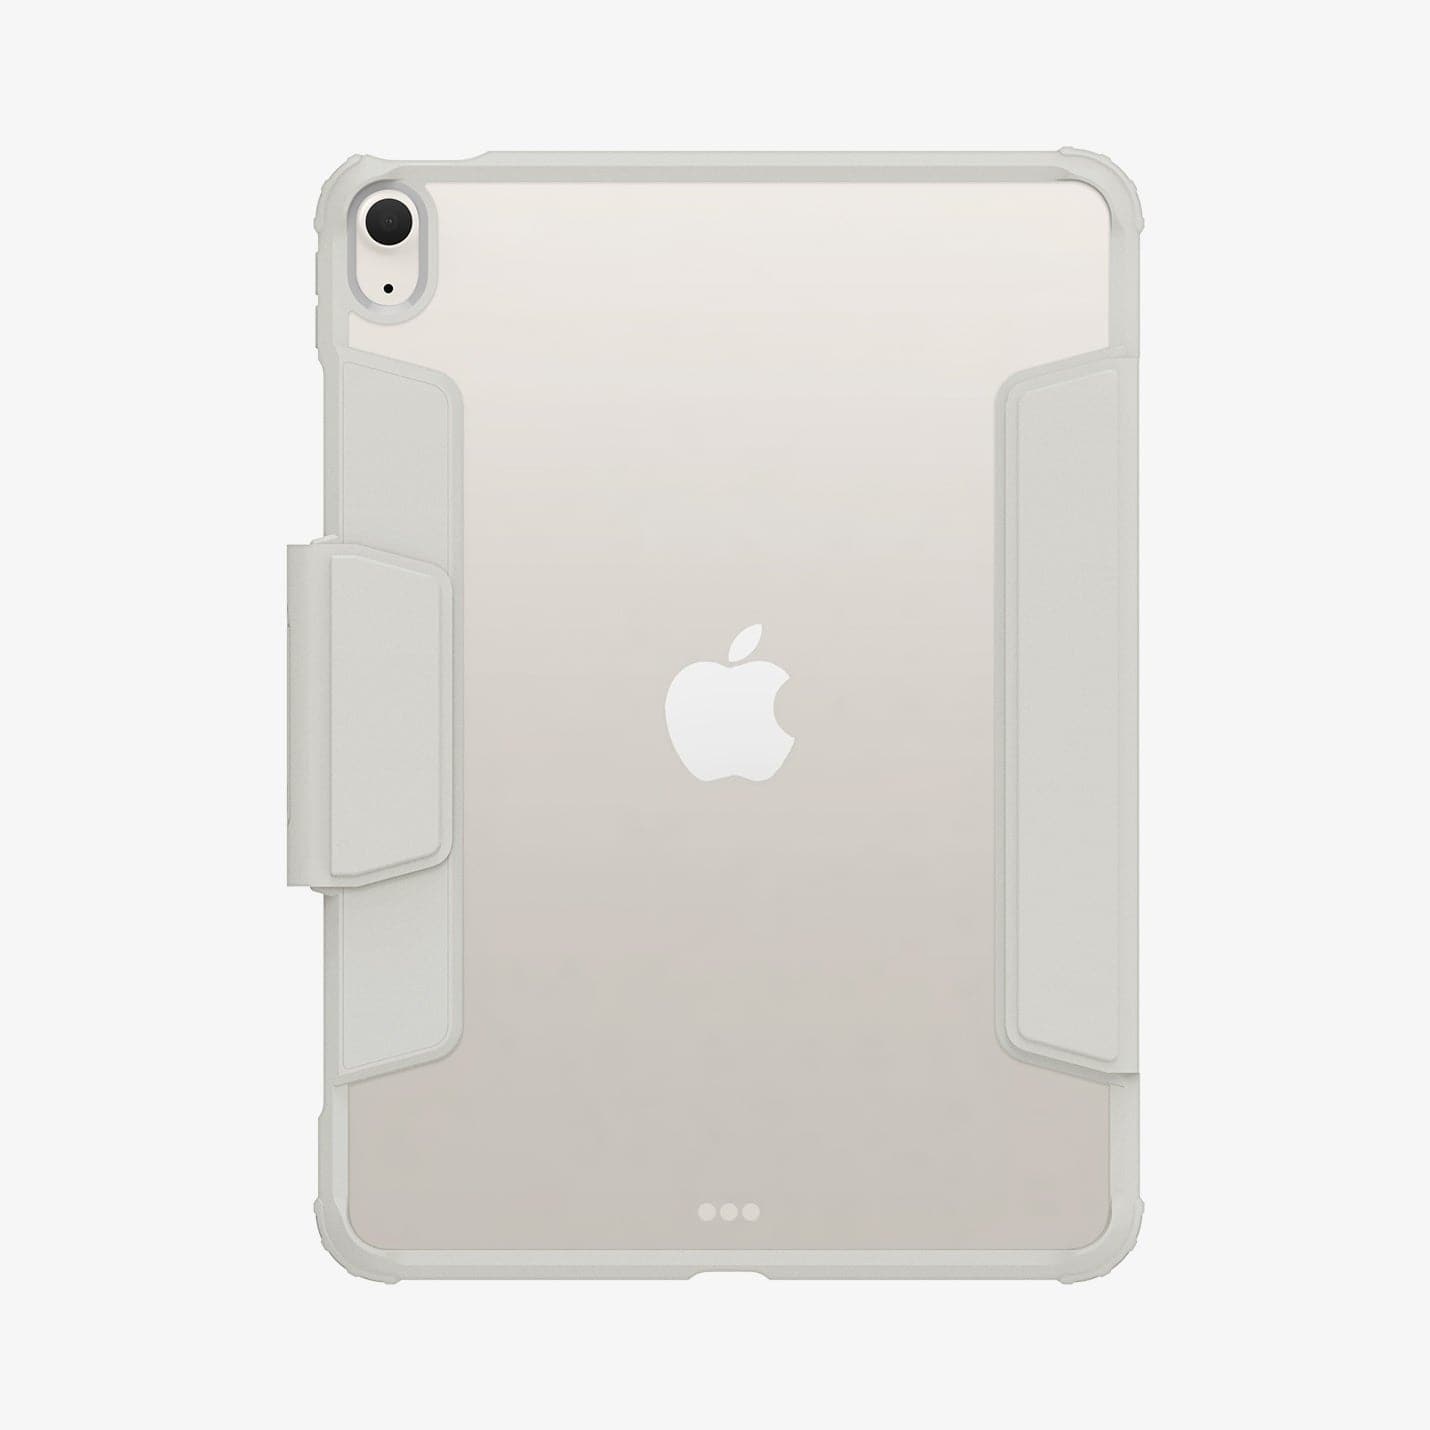 ACS06074 - iPad Air 10.9" Case Air Skin Pro in gray showing the back